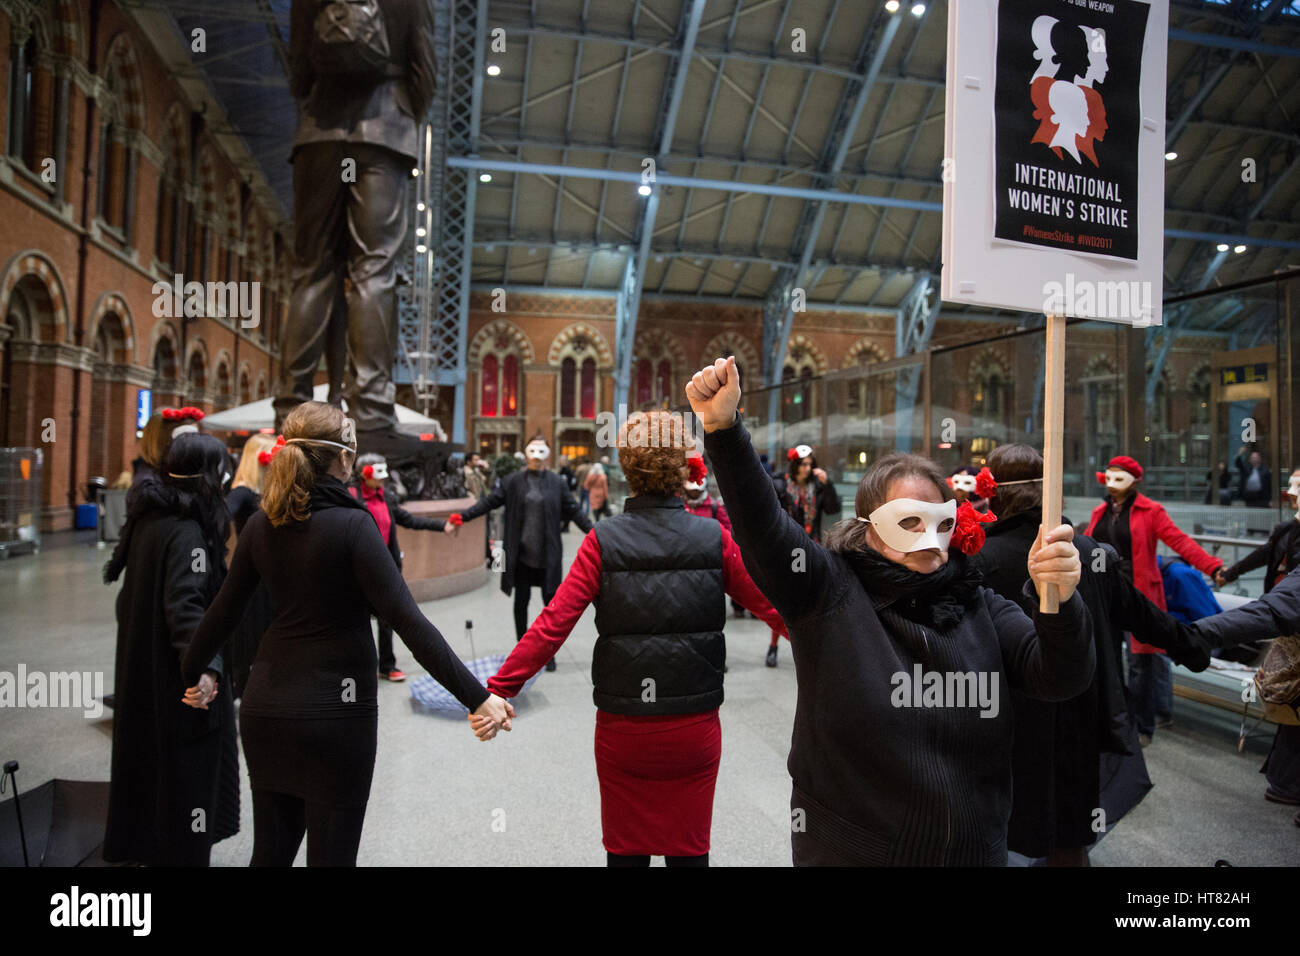 London, UK. 8th March, 2017. Women from Global Women's Strike, Women's Strike UK and Polish feminists stage  performance art at St Pancras station to coincide with International Women's Day and the International Women's Strike. Credit: Mark Kerrison/Alamy Live News Stock Photo